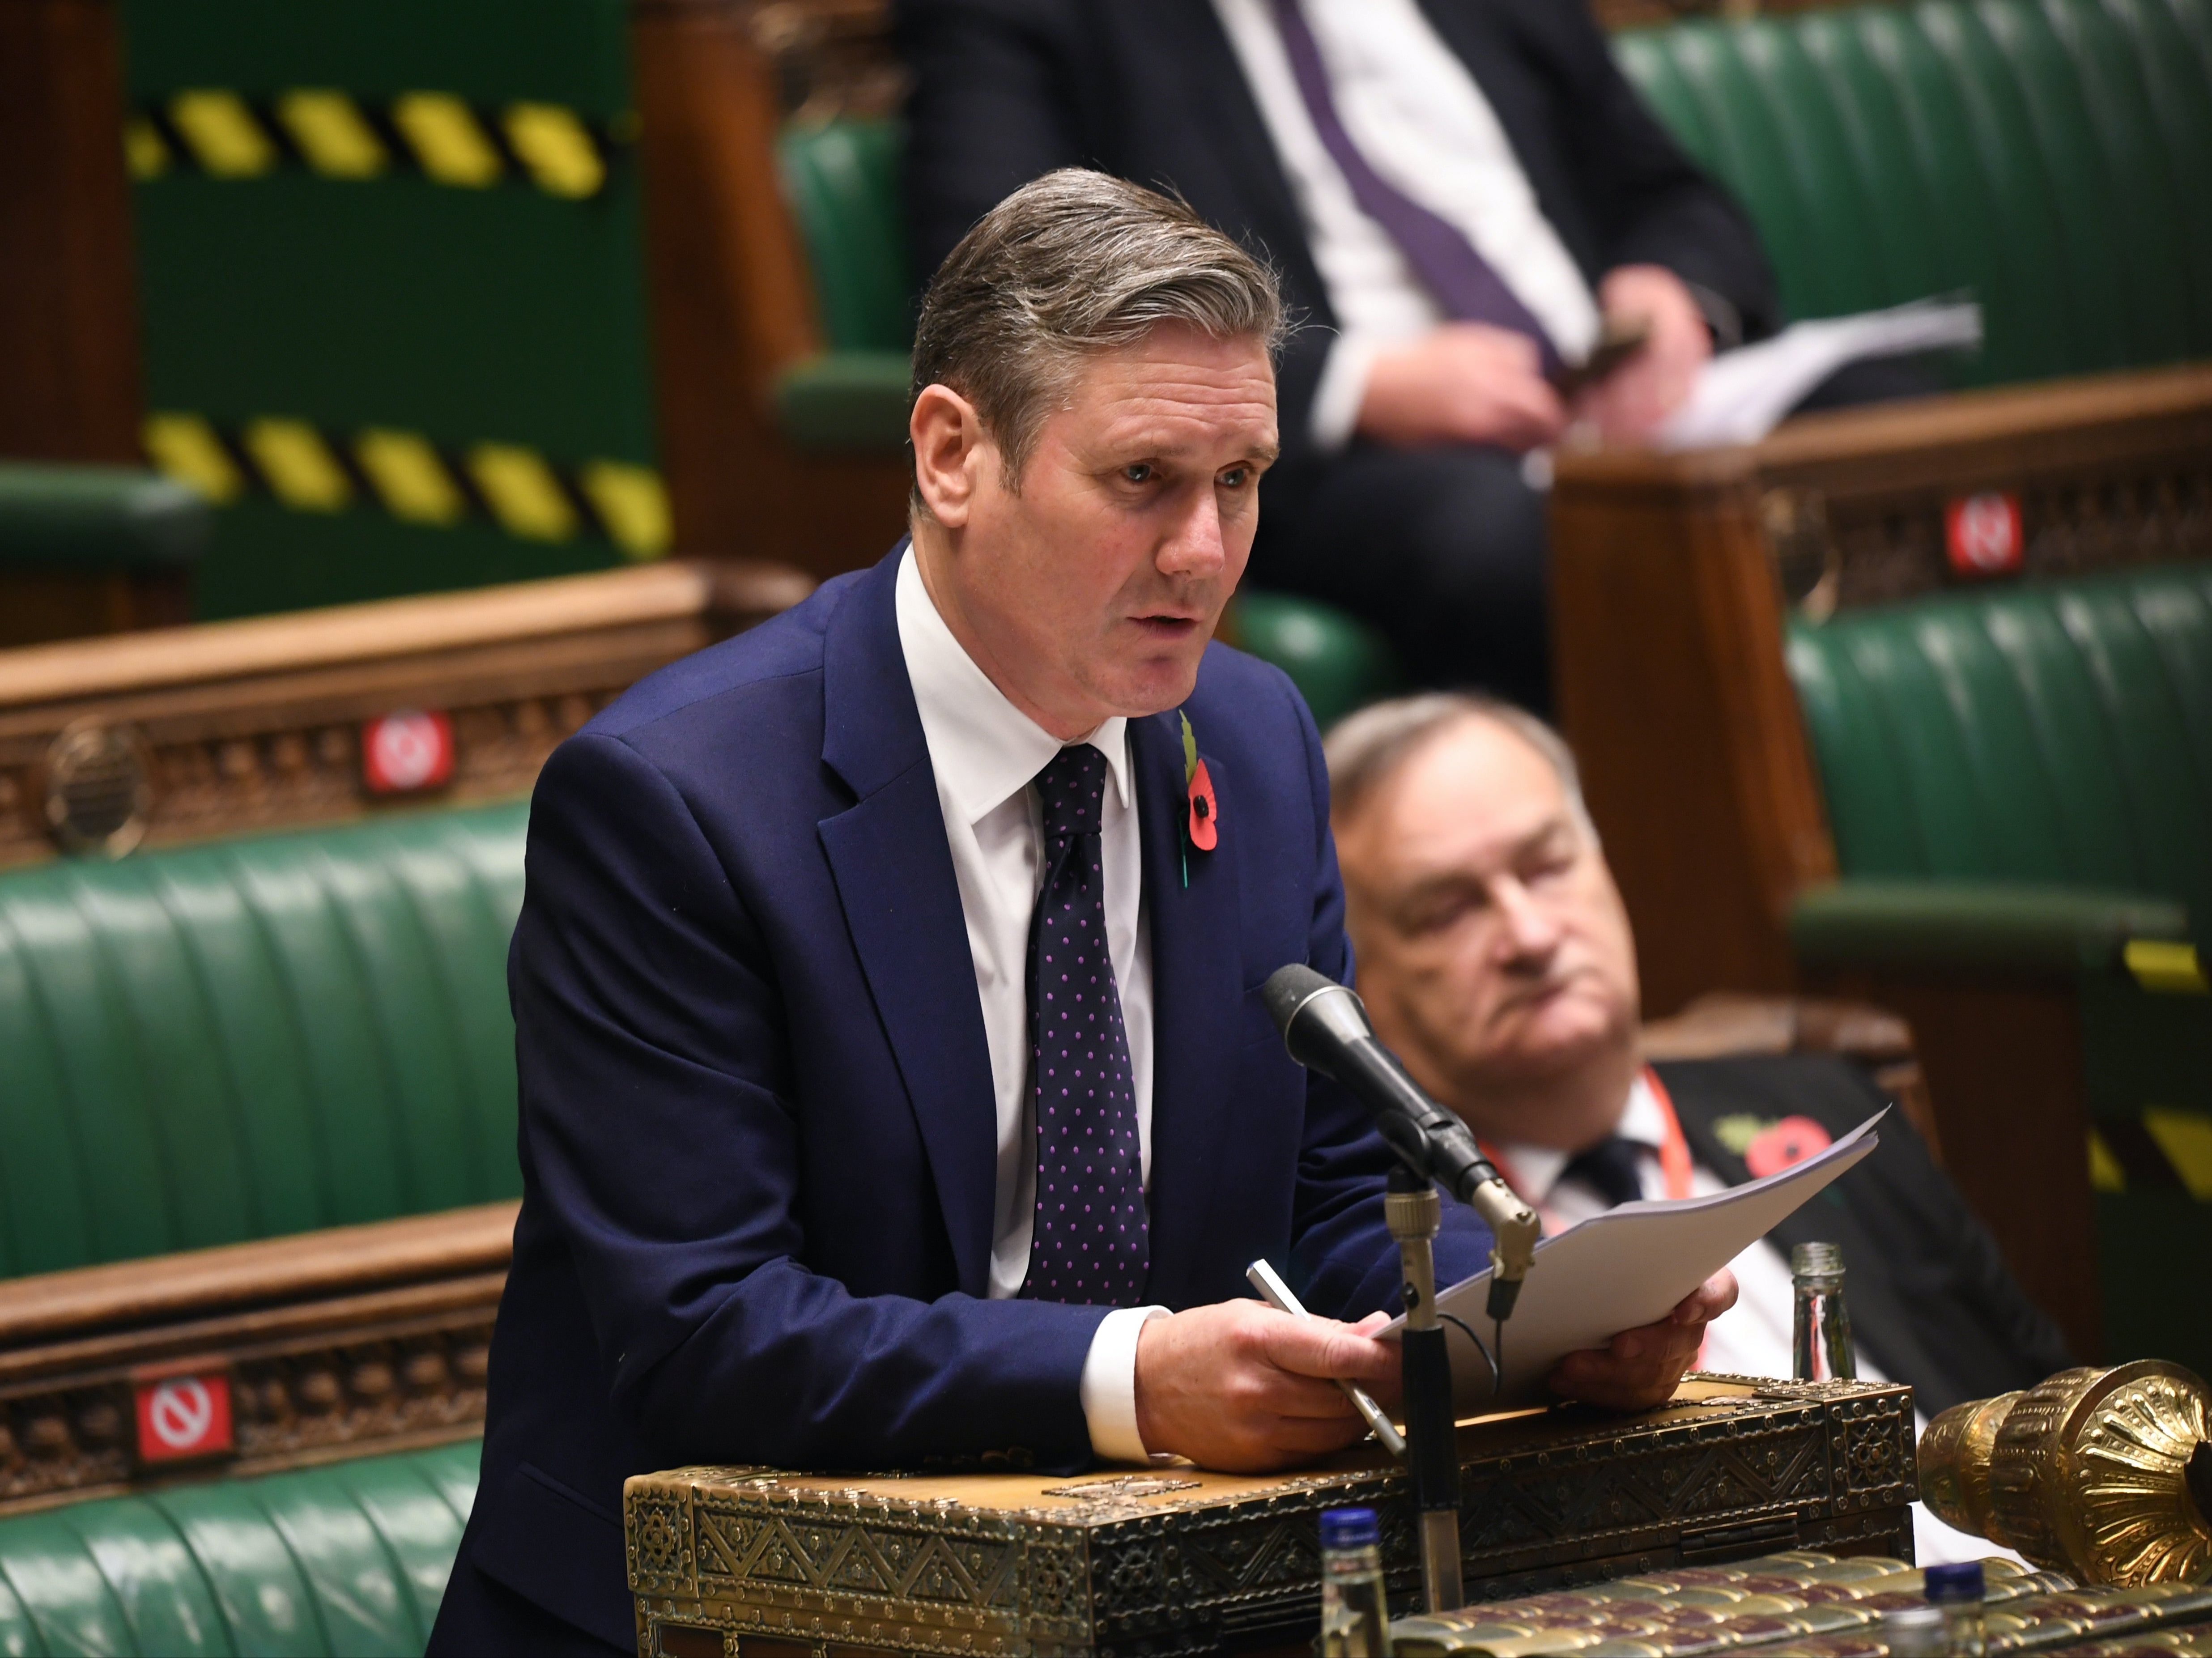 Labour leader Sir Keir Starmer says: ‘Islamophobia has no place in our party or society and we are committed to rooting it out’